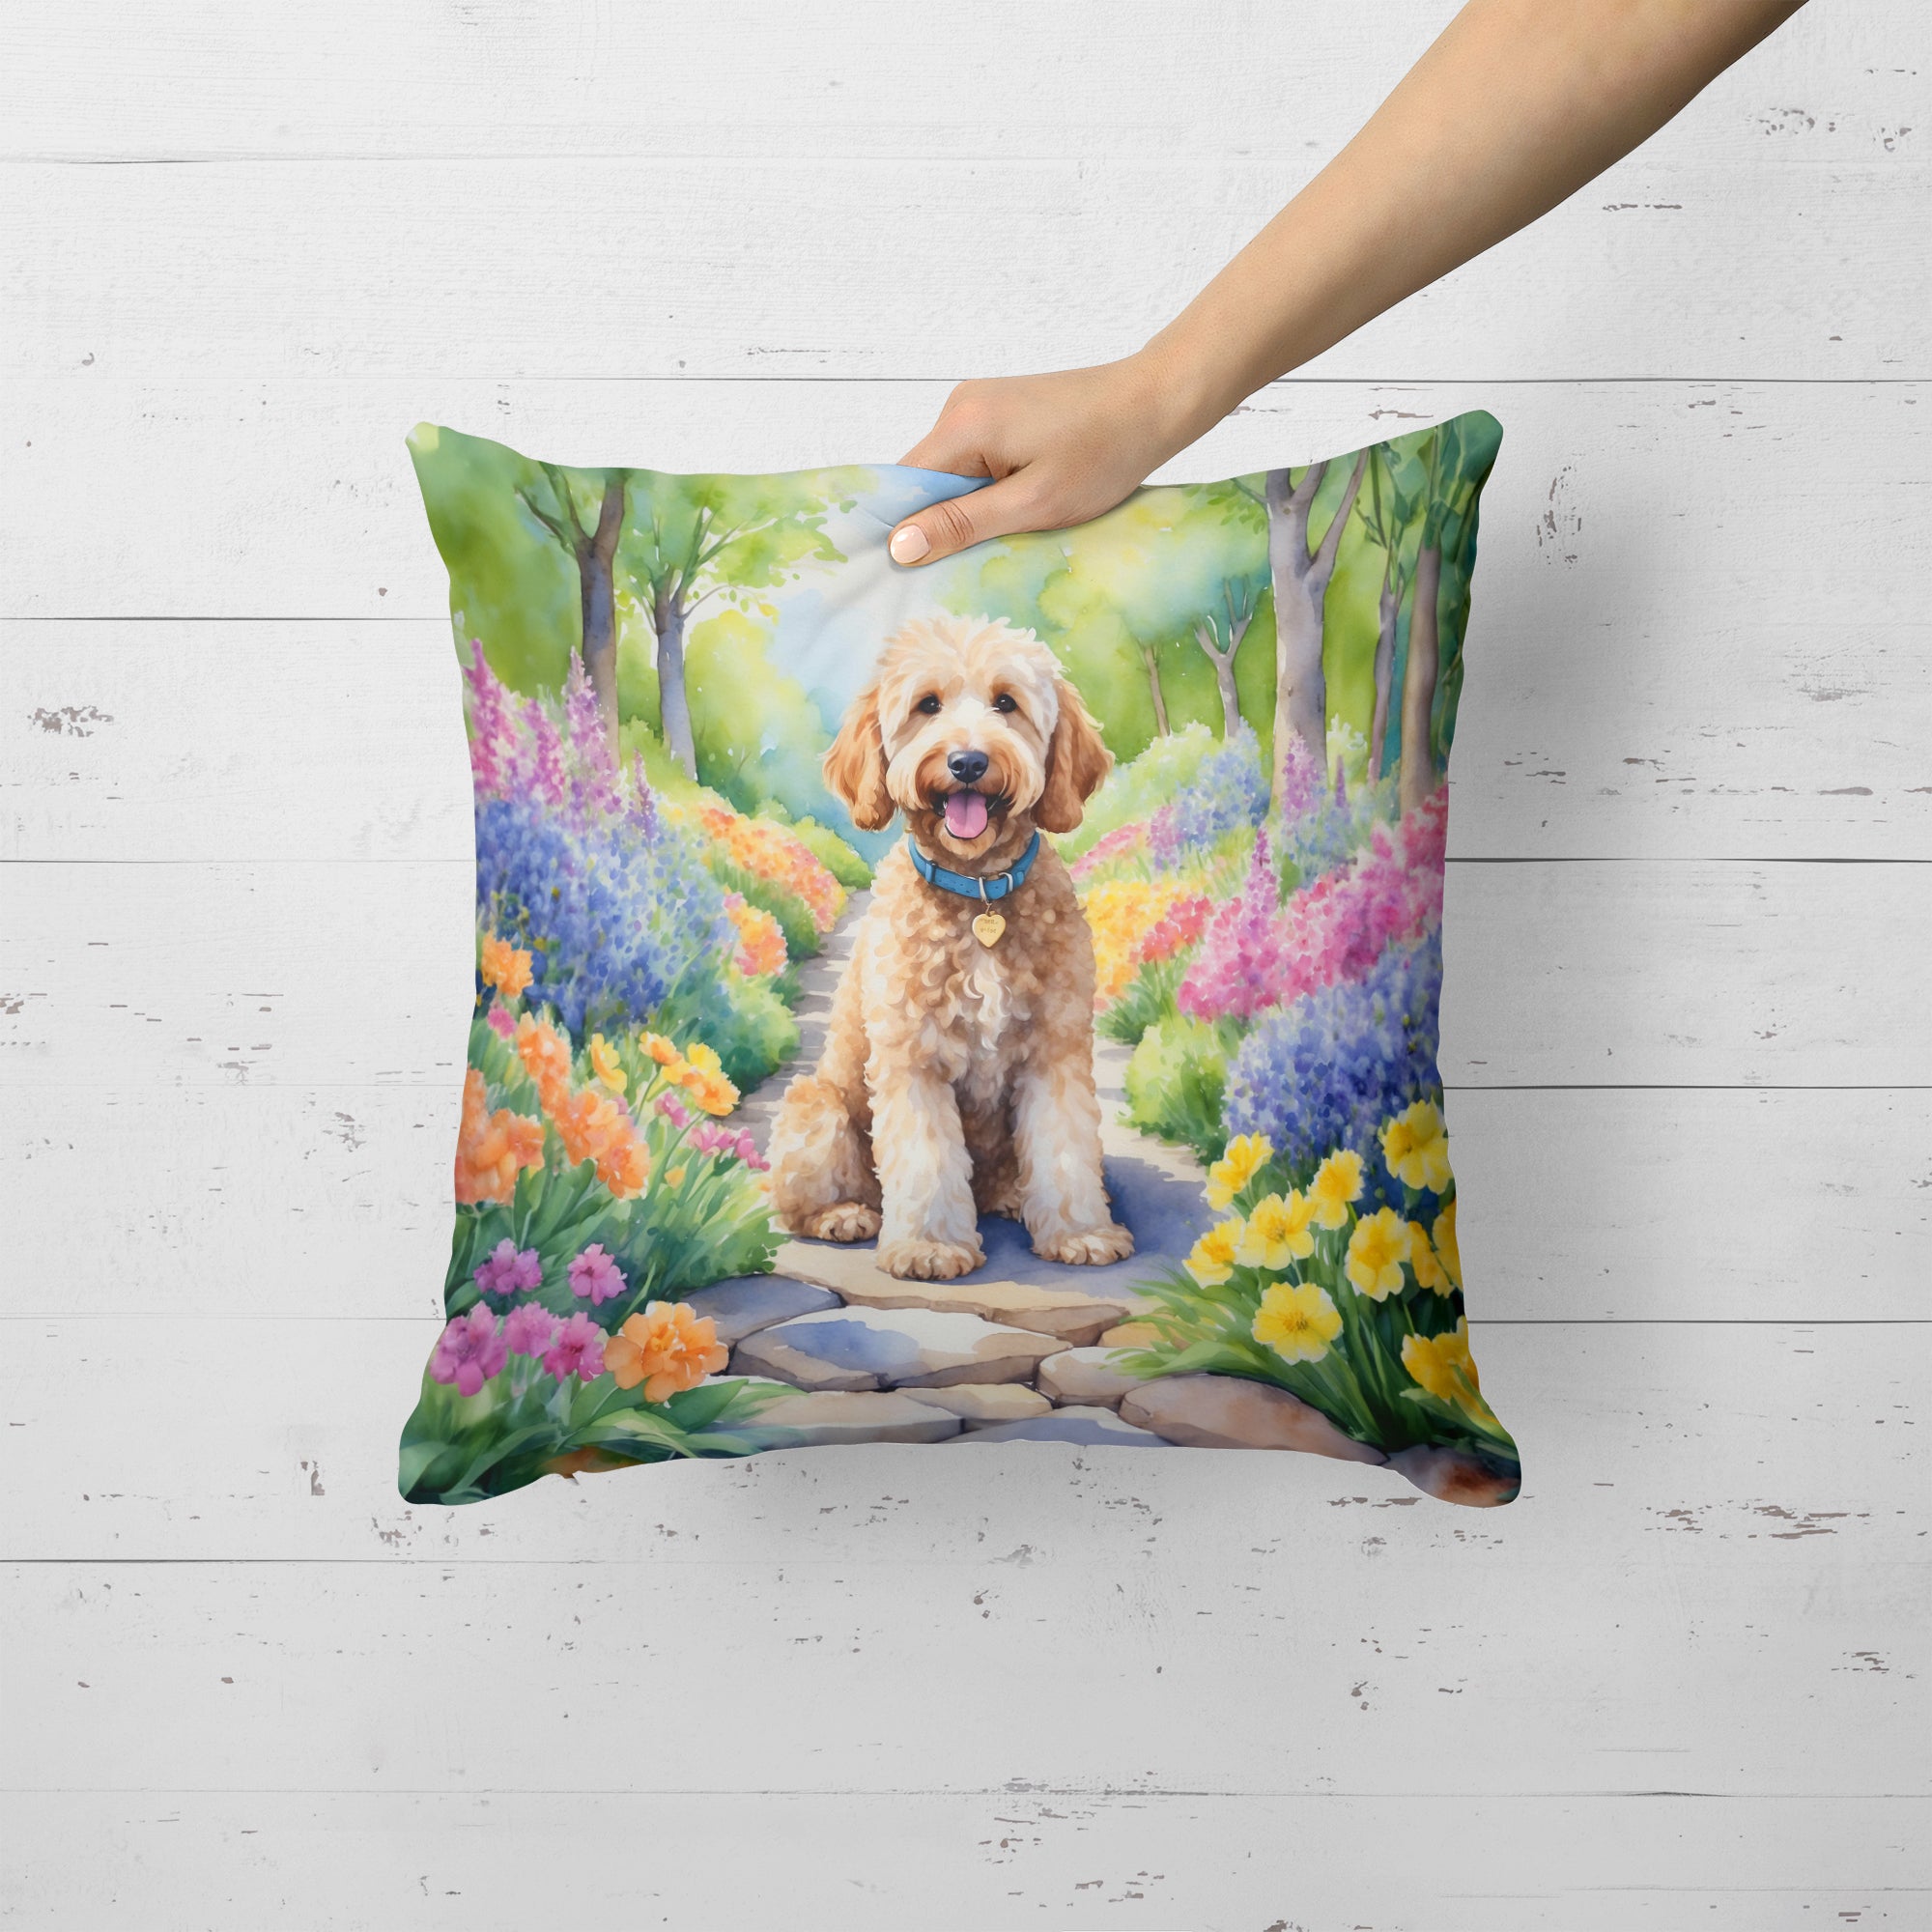 Buy this Goldendoodle Spring Path Throw Pillow